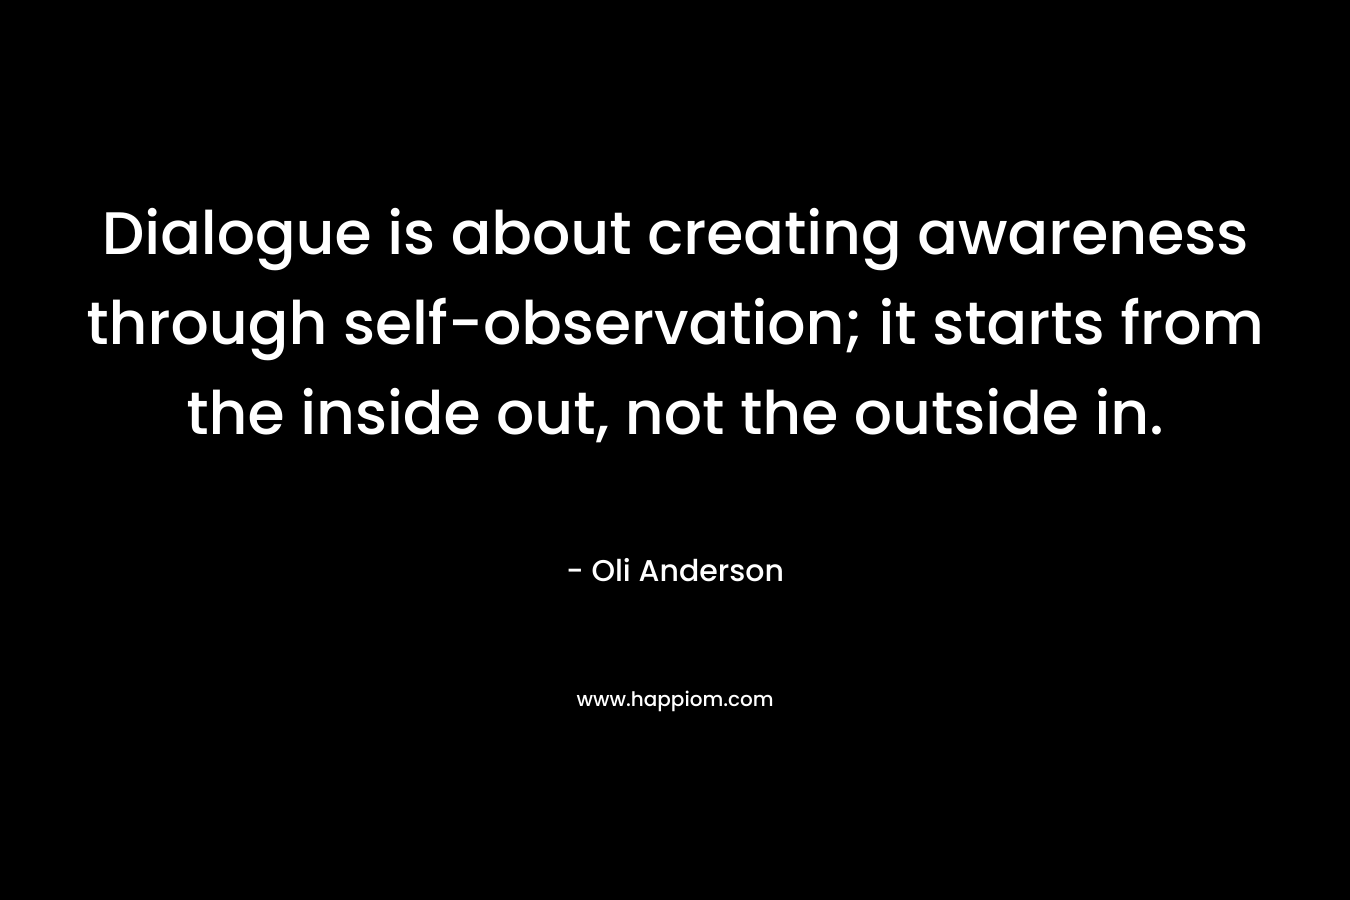 Dialogue is about creating awareness through self-observation; it starts from the inside out, not the outside in. – Oli Anderson